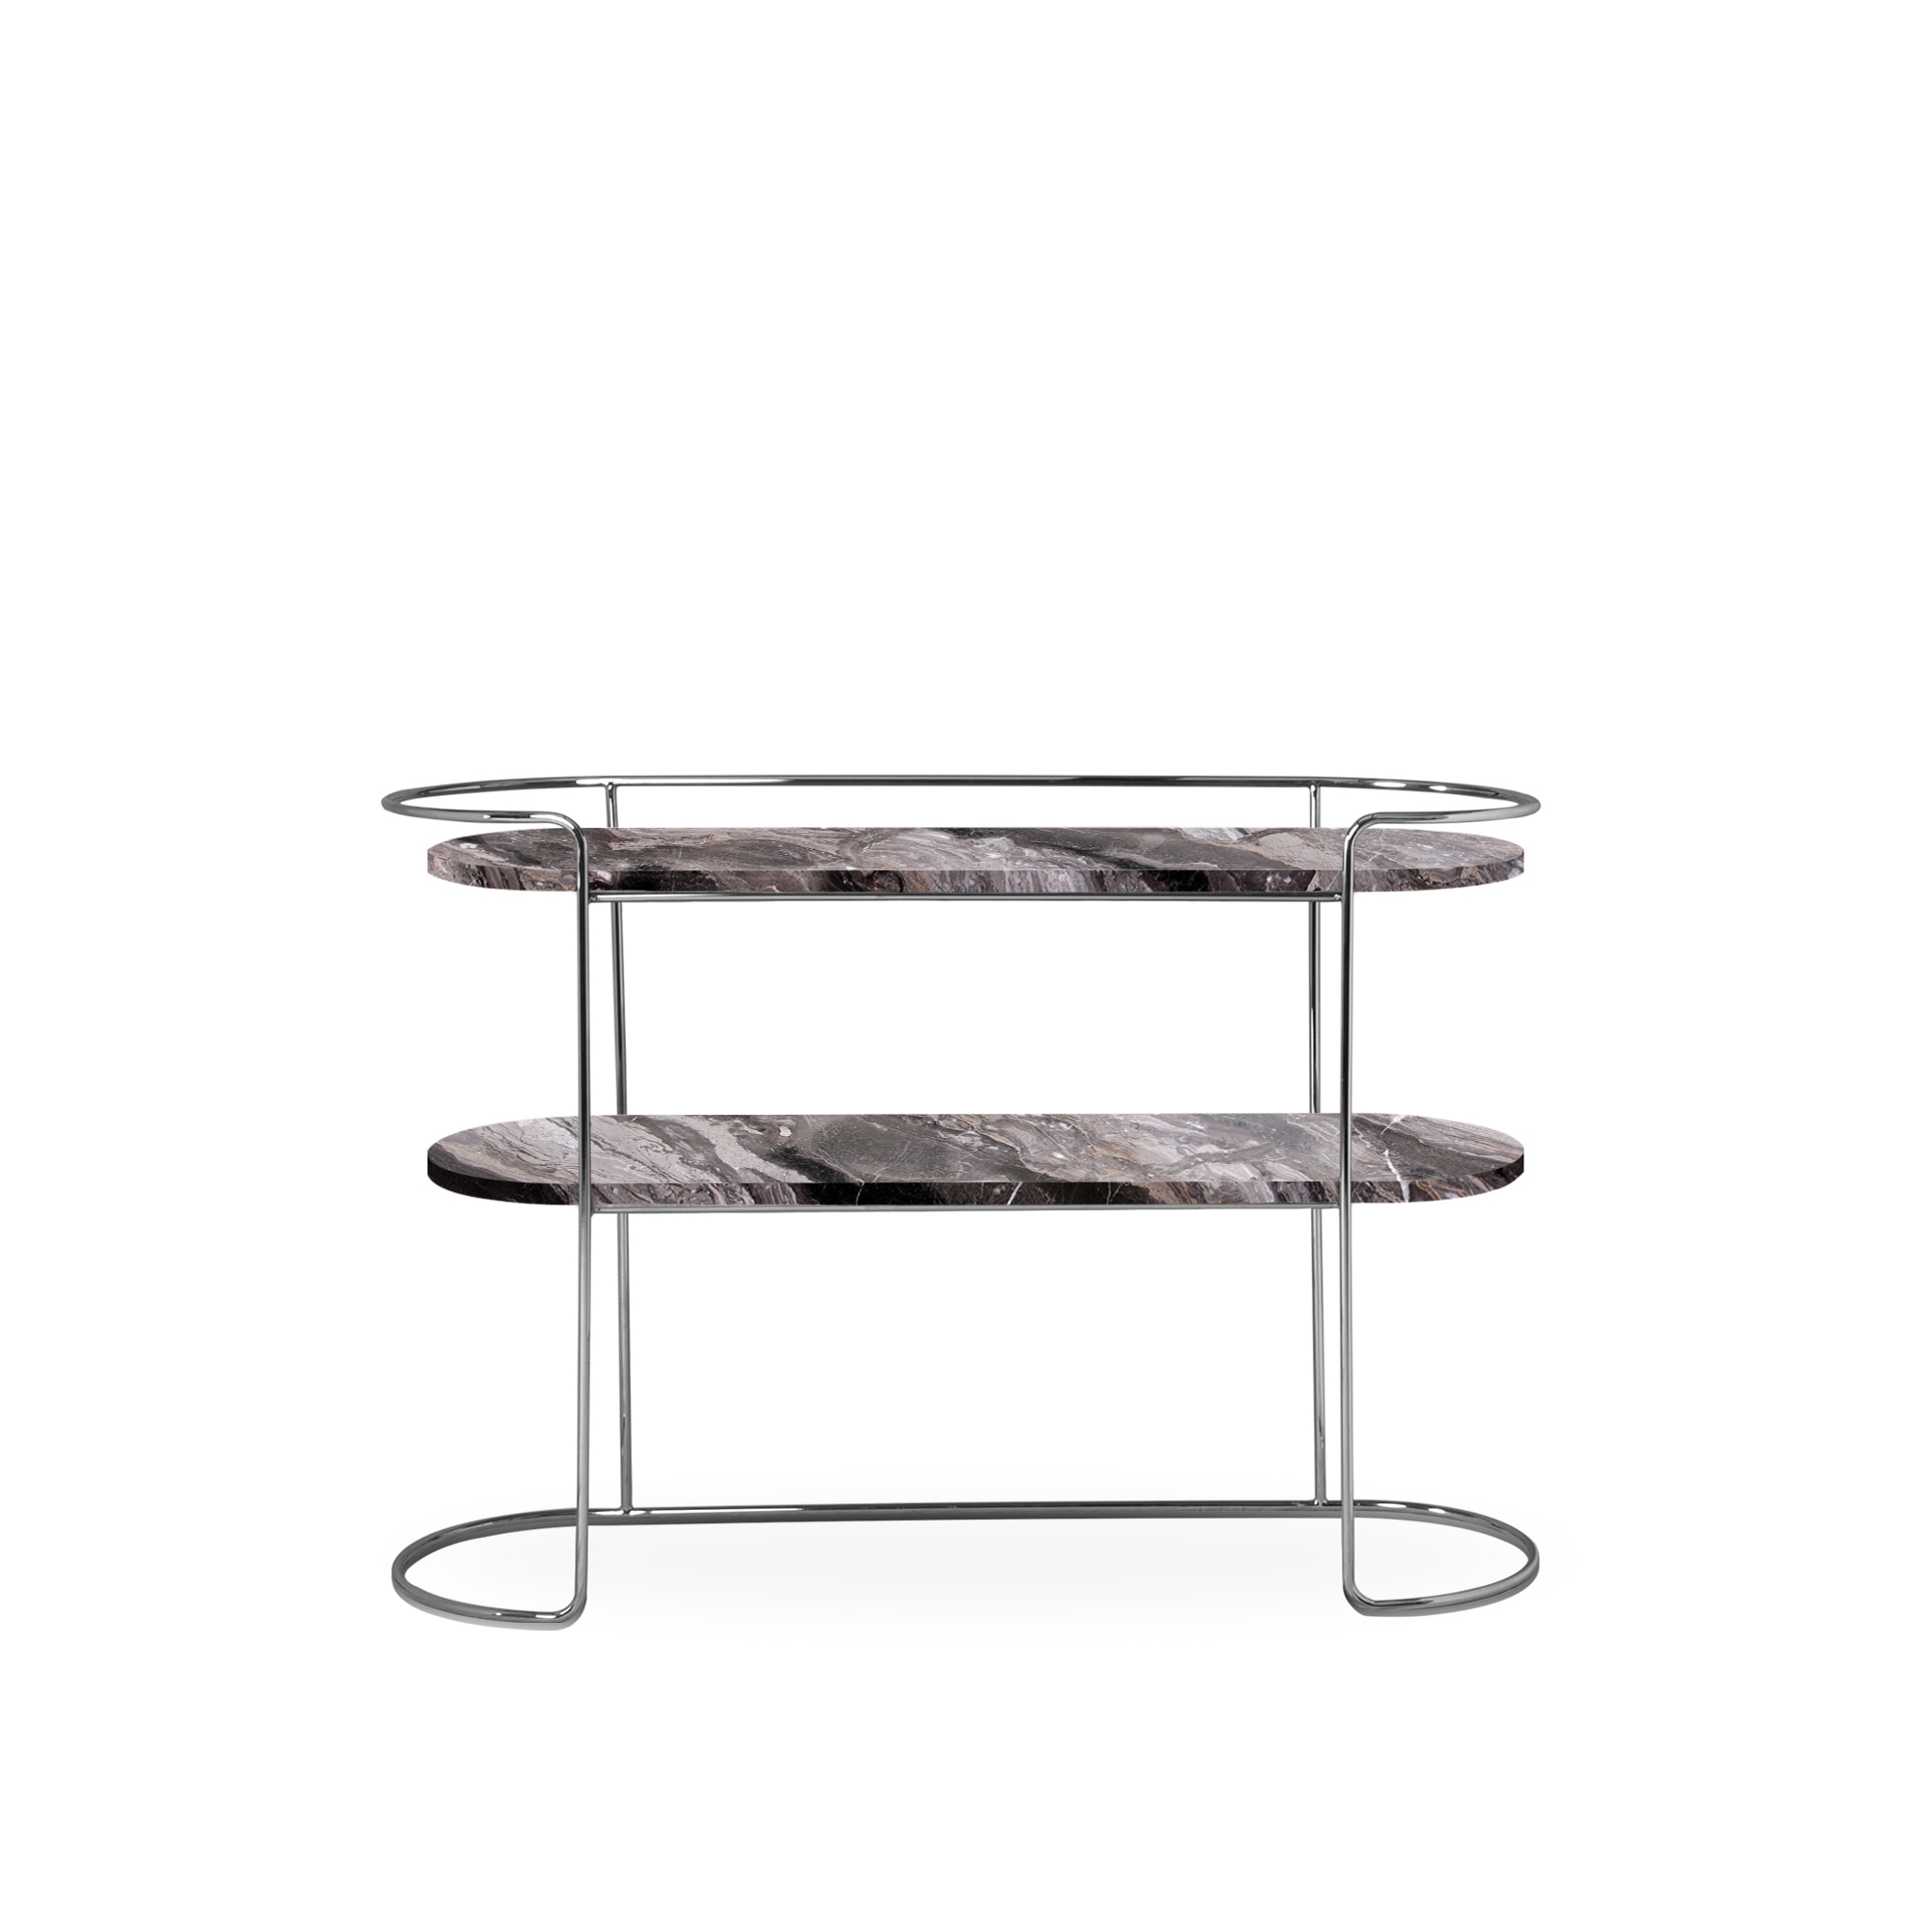 Gabo W | Art Series | Decasa Marble Marble Dining Table